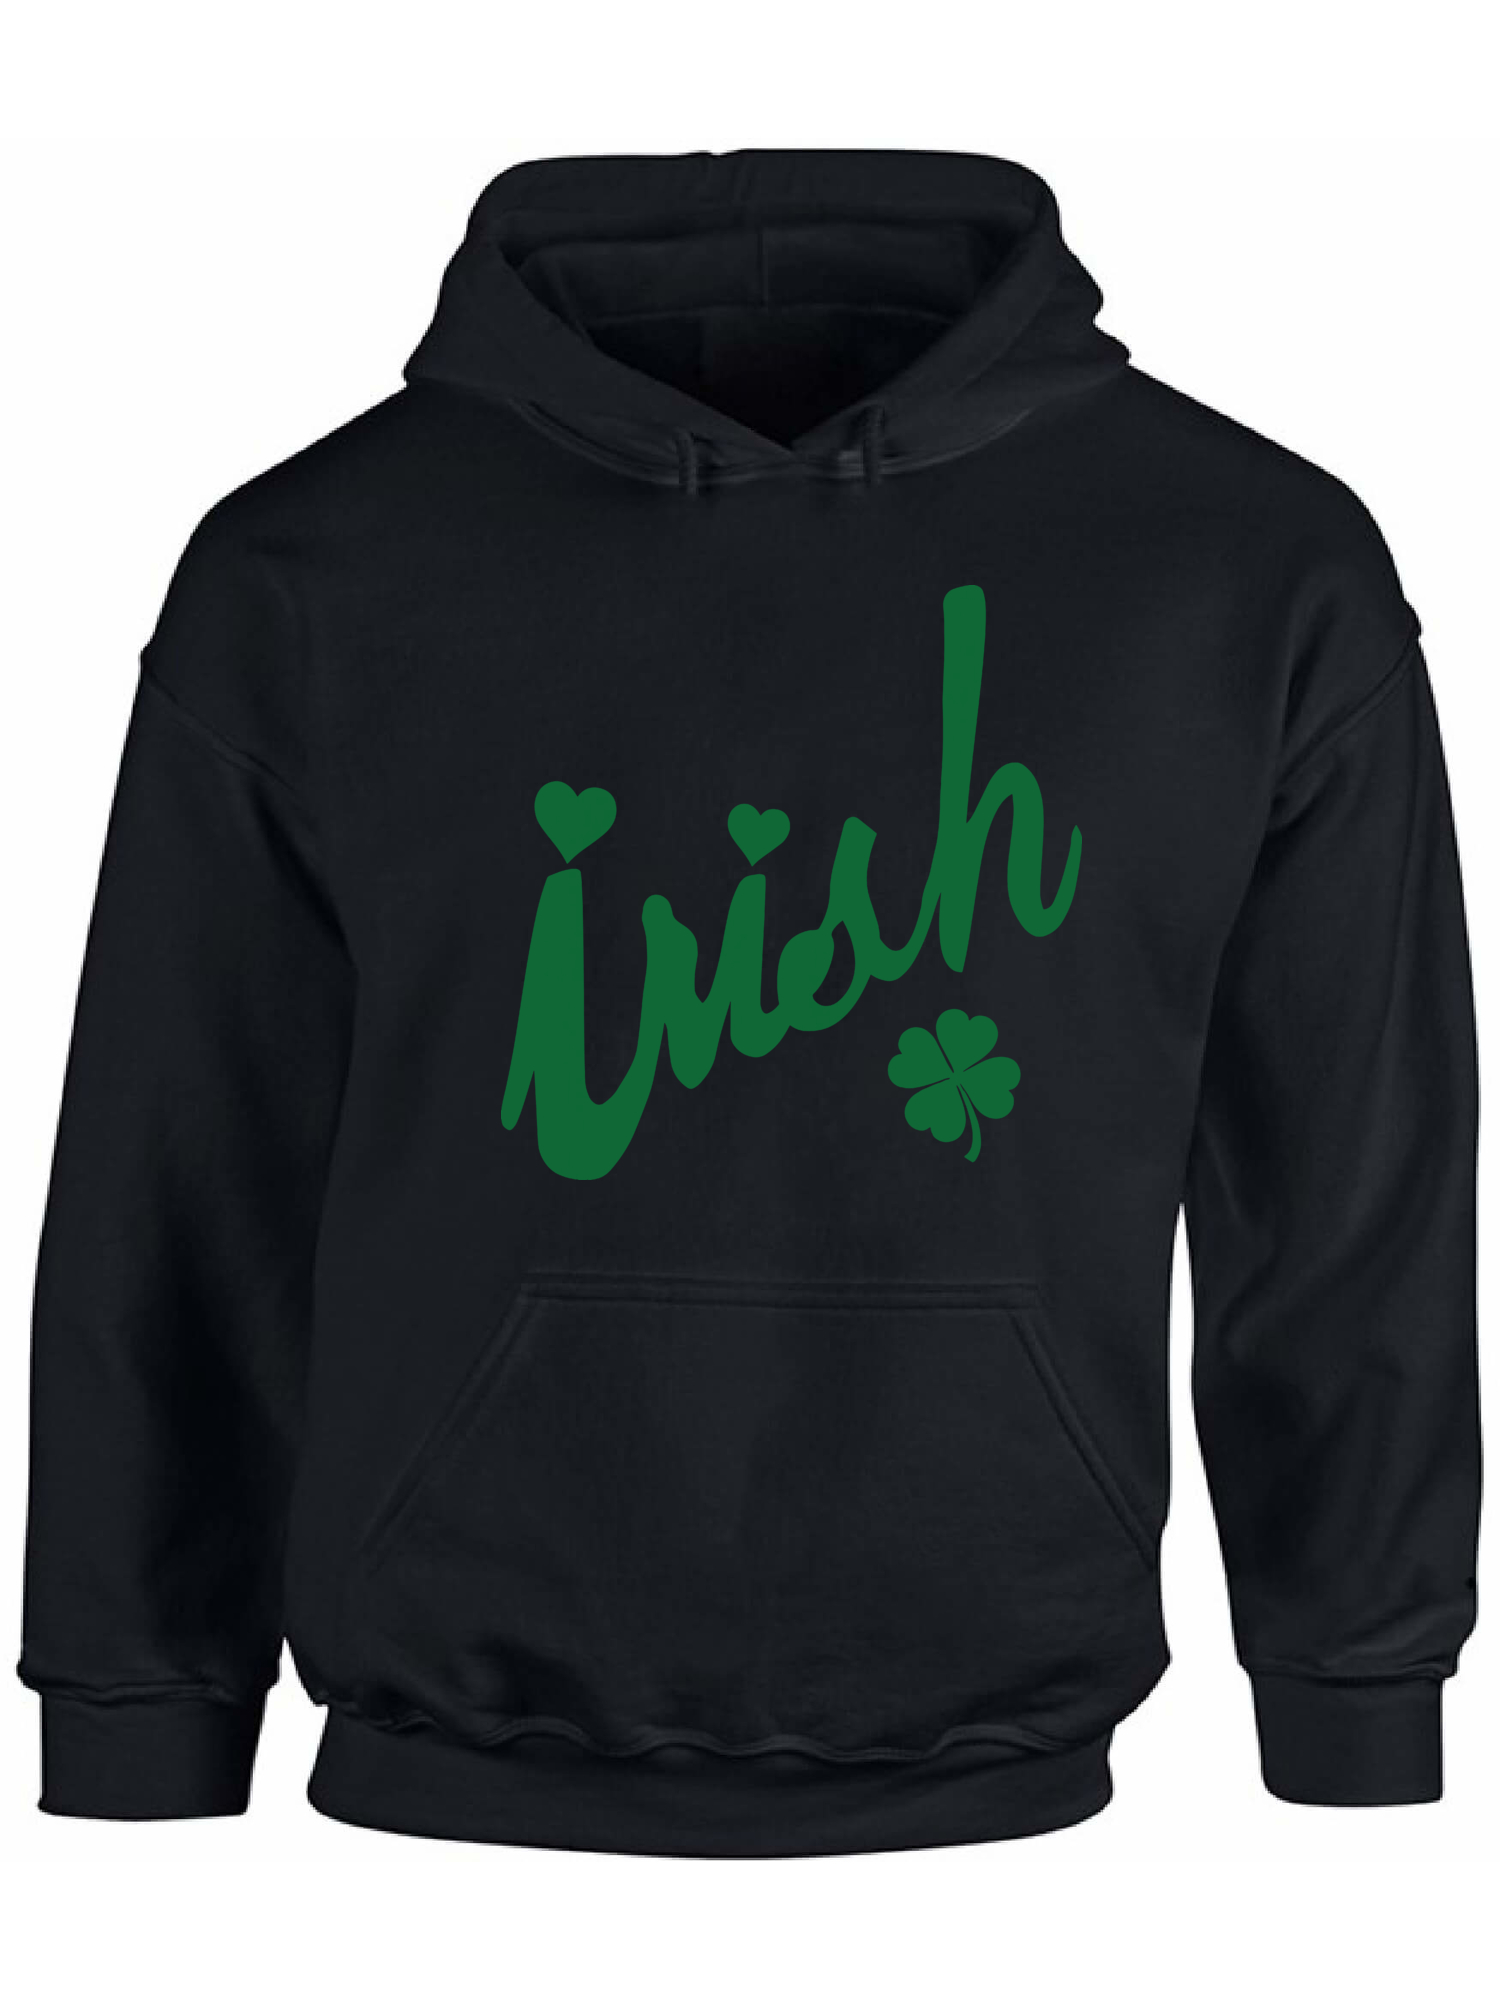 St. Patricks Day Hoodie Green Clover Leaf Hooded Sweatshirt Shamrock Sweater for Him Irish Clover Hoodie for Her Pattys Day - image 1 of 5